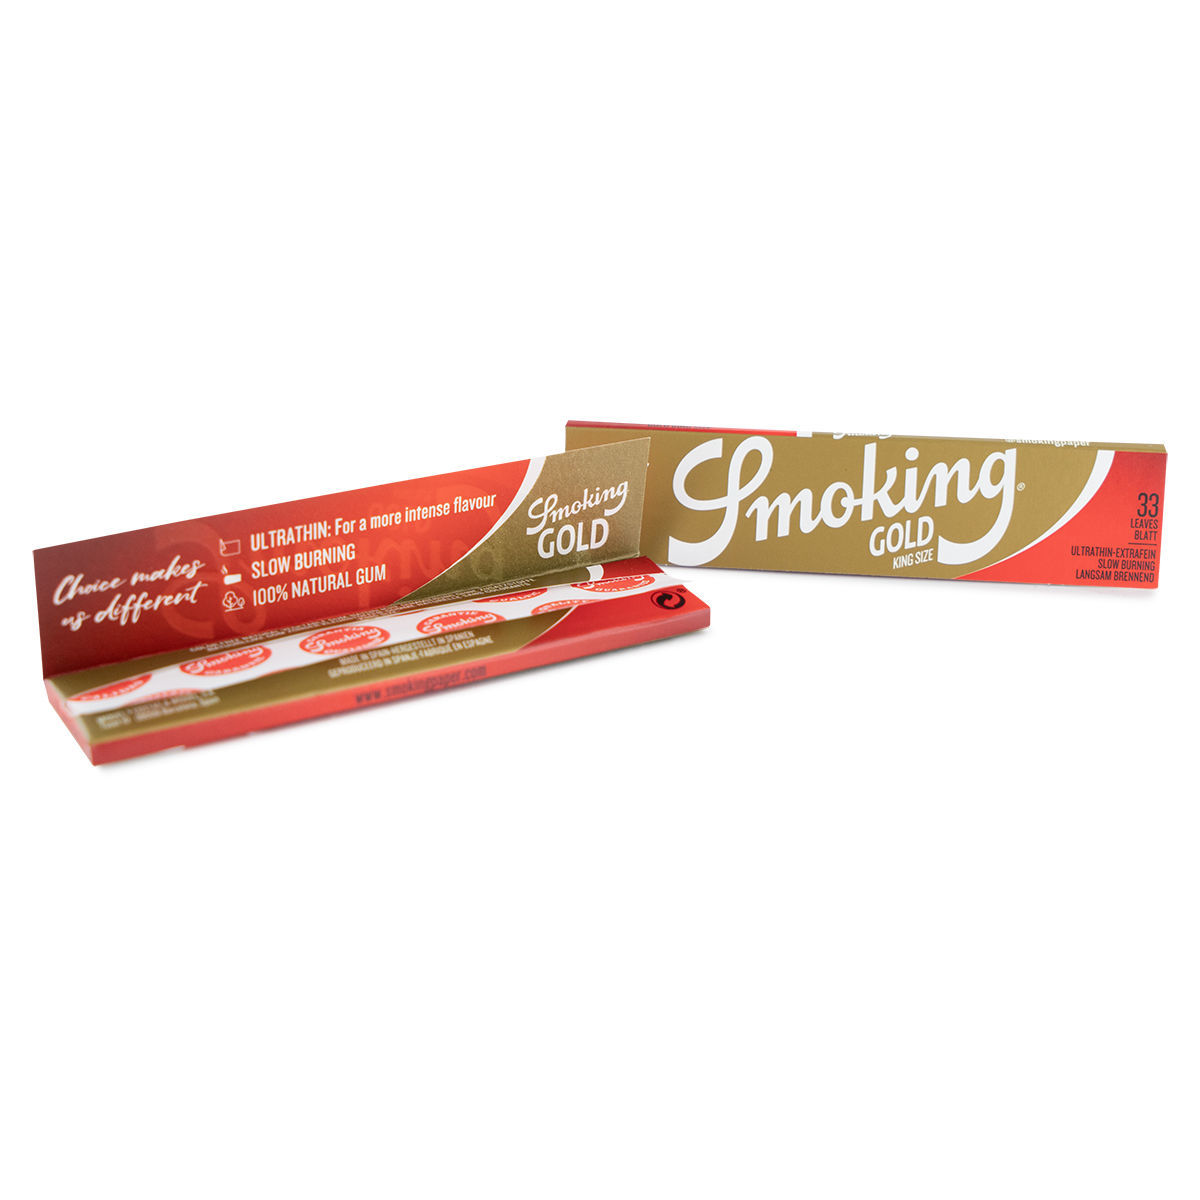 100 x 33 Blättchen Long Papers Original 2 Boxen Smoking® GOLD King Size Papers 